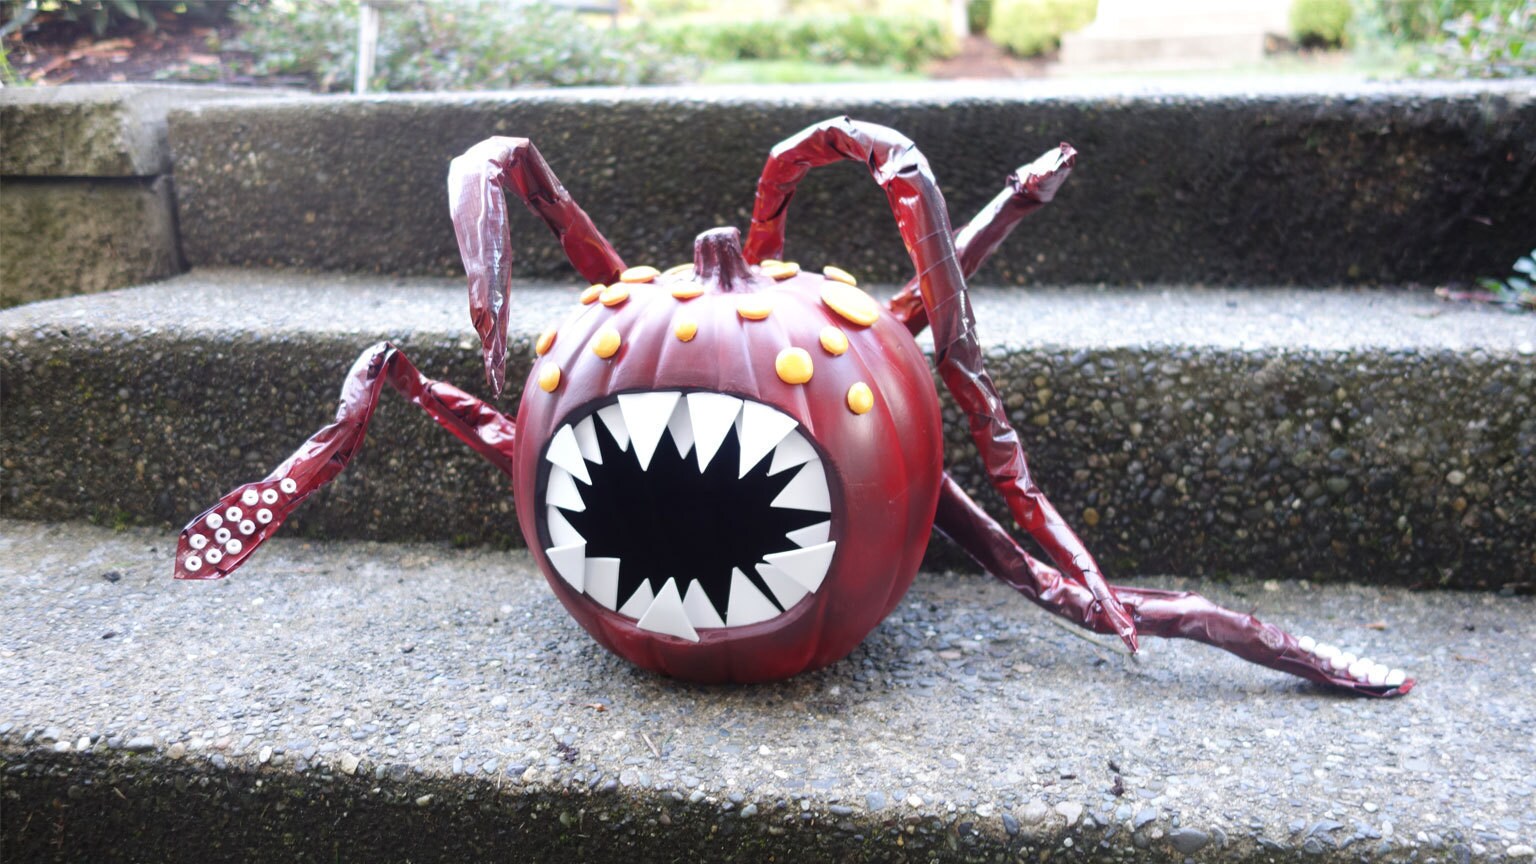 Haul This Rathtar-O’-Lantern to Your Front Porch